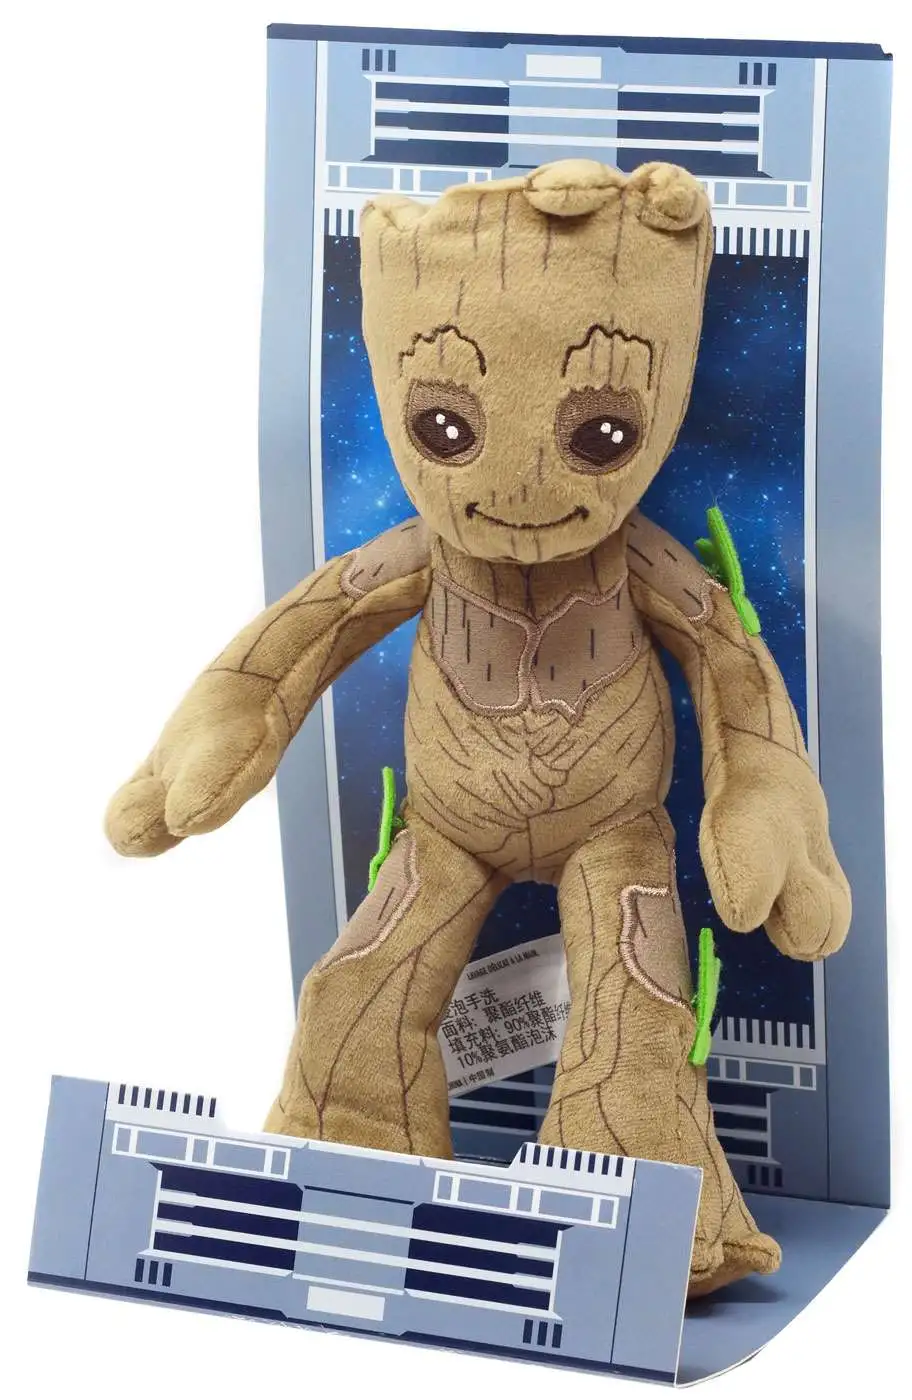 Marvel & Guardians of the Galaxy Plush 